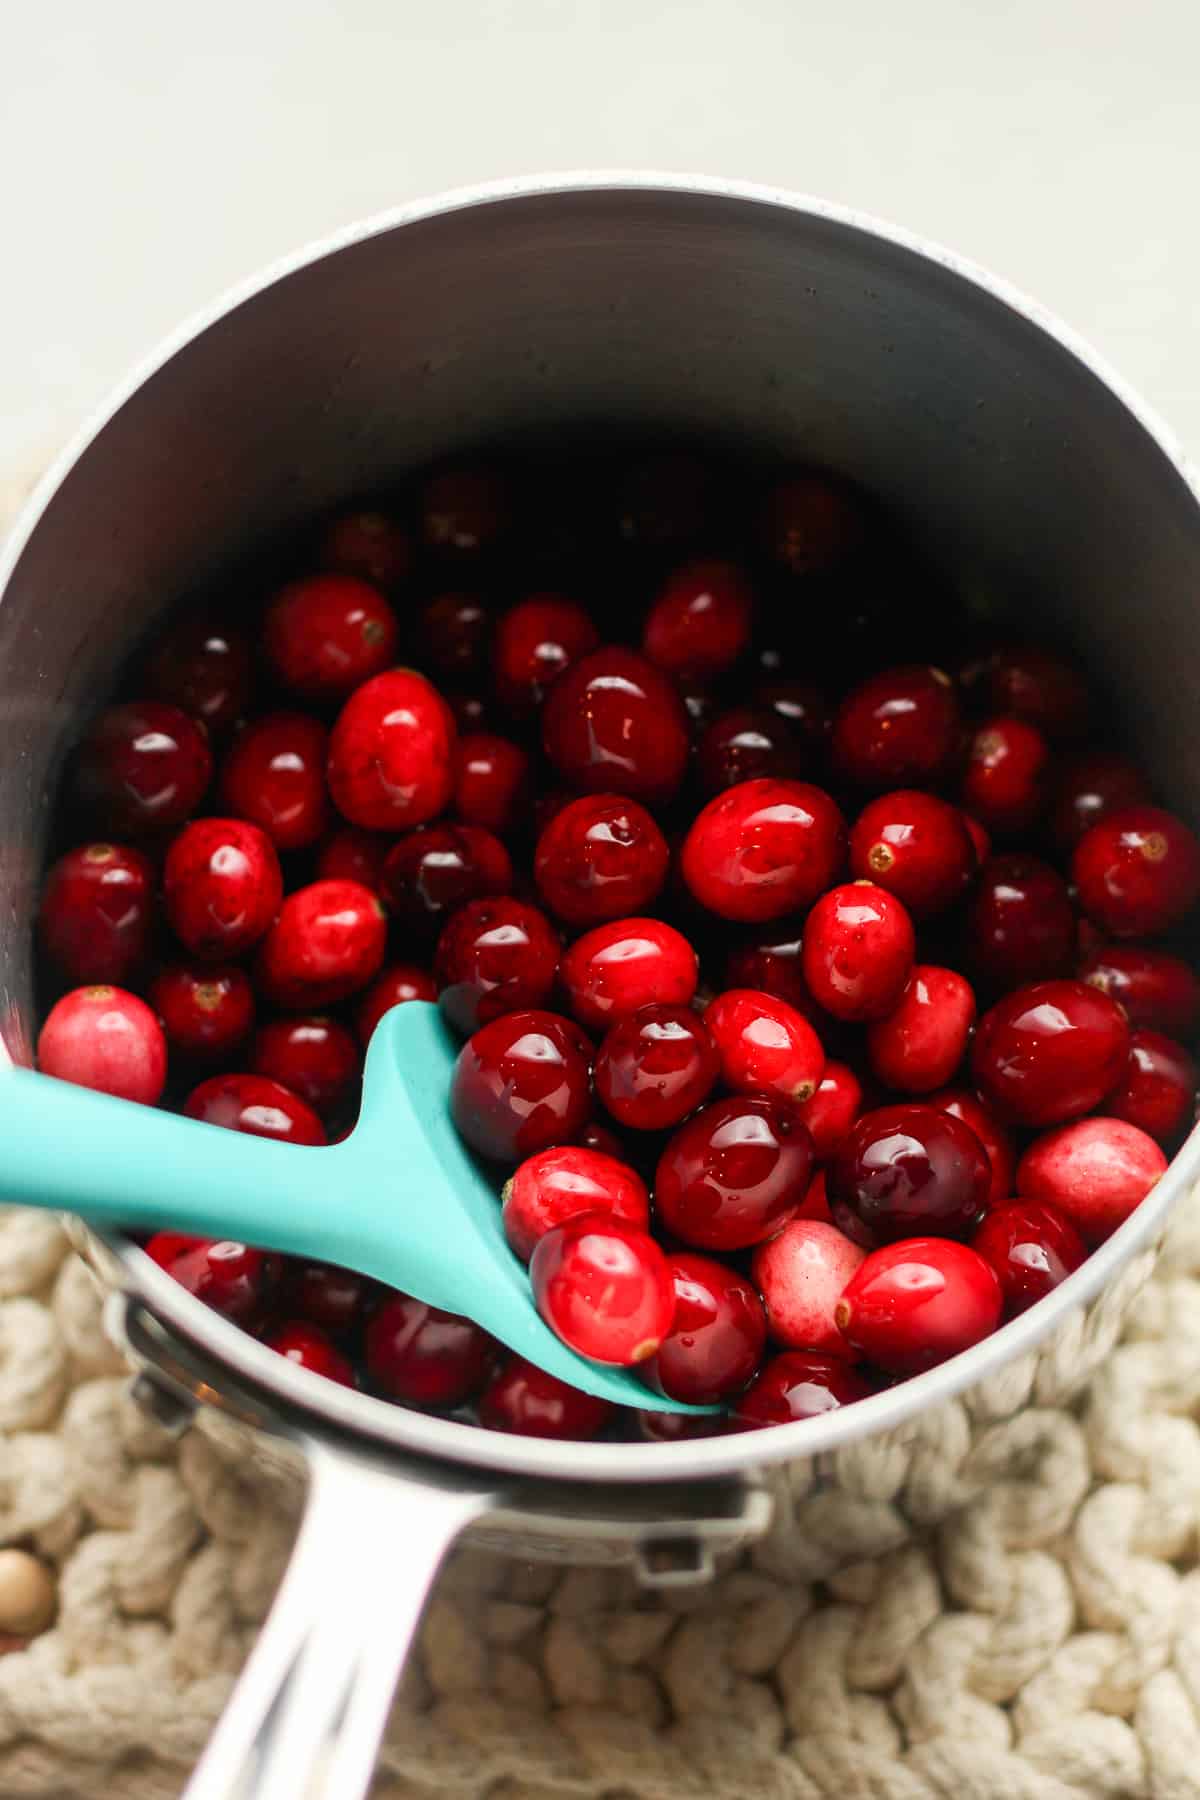 A saucepan of the cranberries in simple syrup.